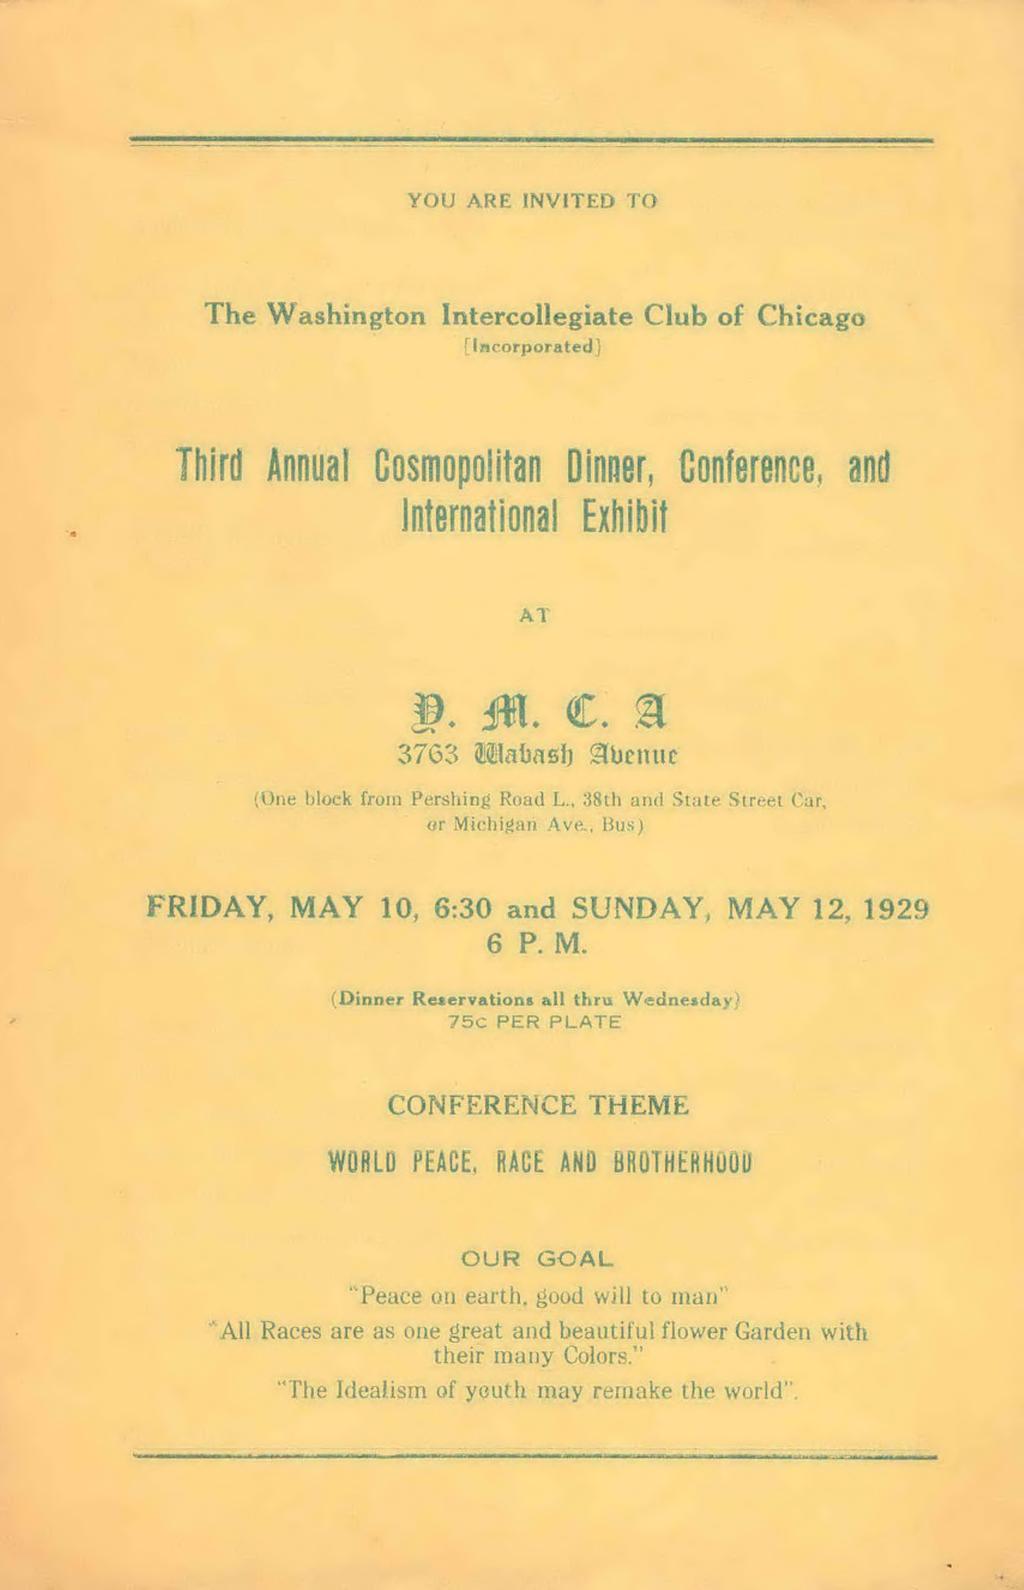 The W ashington Intercollegiate Club of Chicago [Incorporated] Third Annual Cosmopolitan Dinner, Conference, and International Exhibit AT s. j w. c.